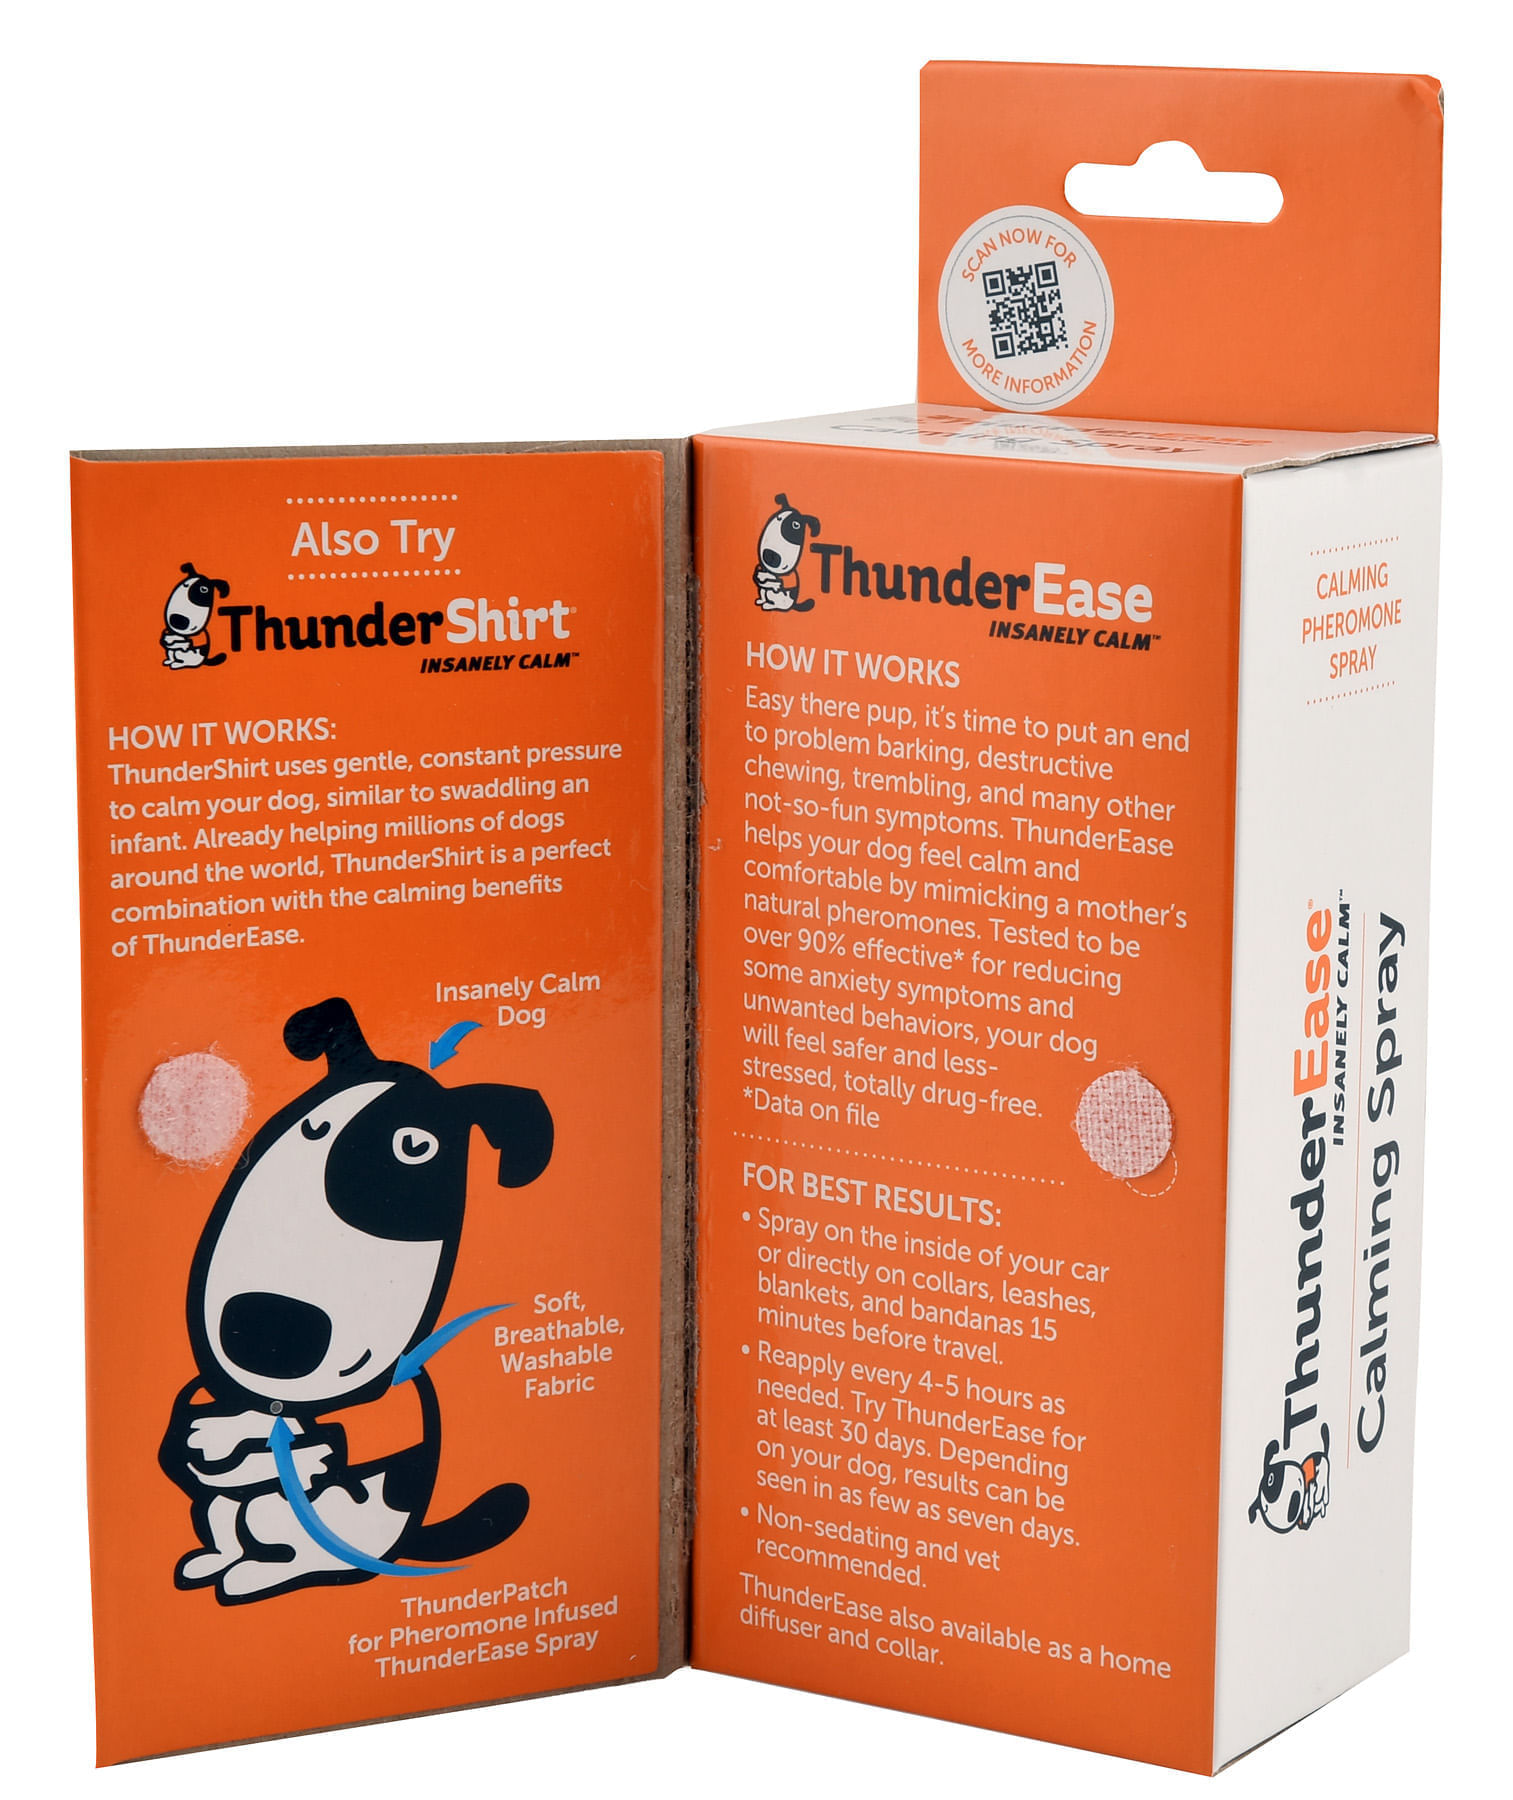 Calm Dog in a Box Anxiety Relief for Dogs Subscription - ThunderShirt